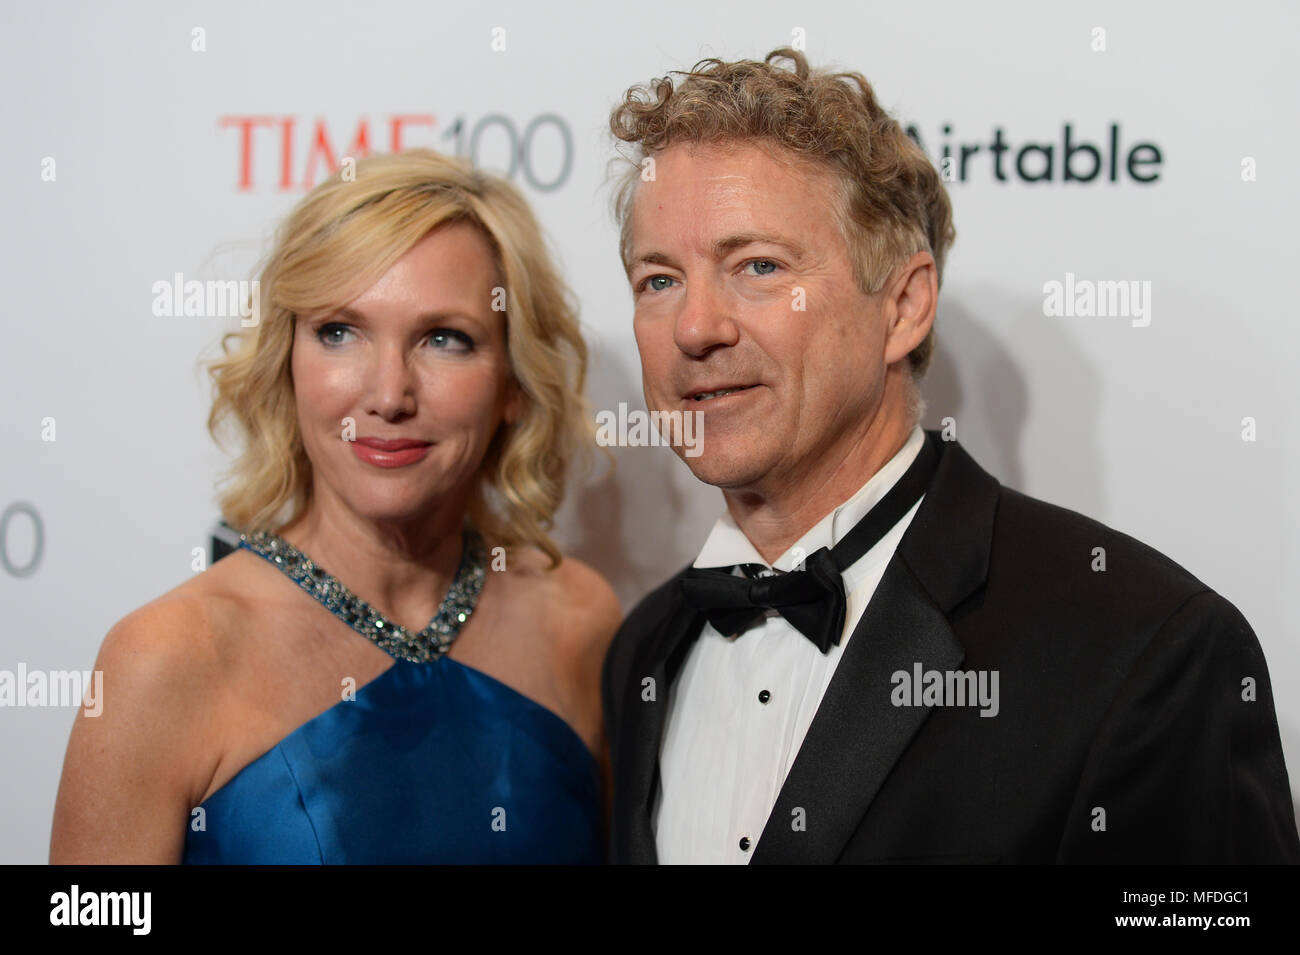 New York, USA. 24th Apr, 2018. Kelley Paul and Rand Paul attend the 2018 Time 100 Gala at Jazz at Lincoln Center on April 24, 2018 in New York City. Credit: Erik Pendzich/Alamy Live News Stock Photo